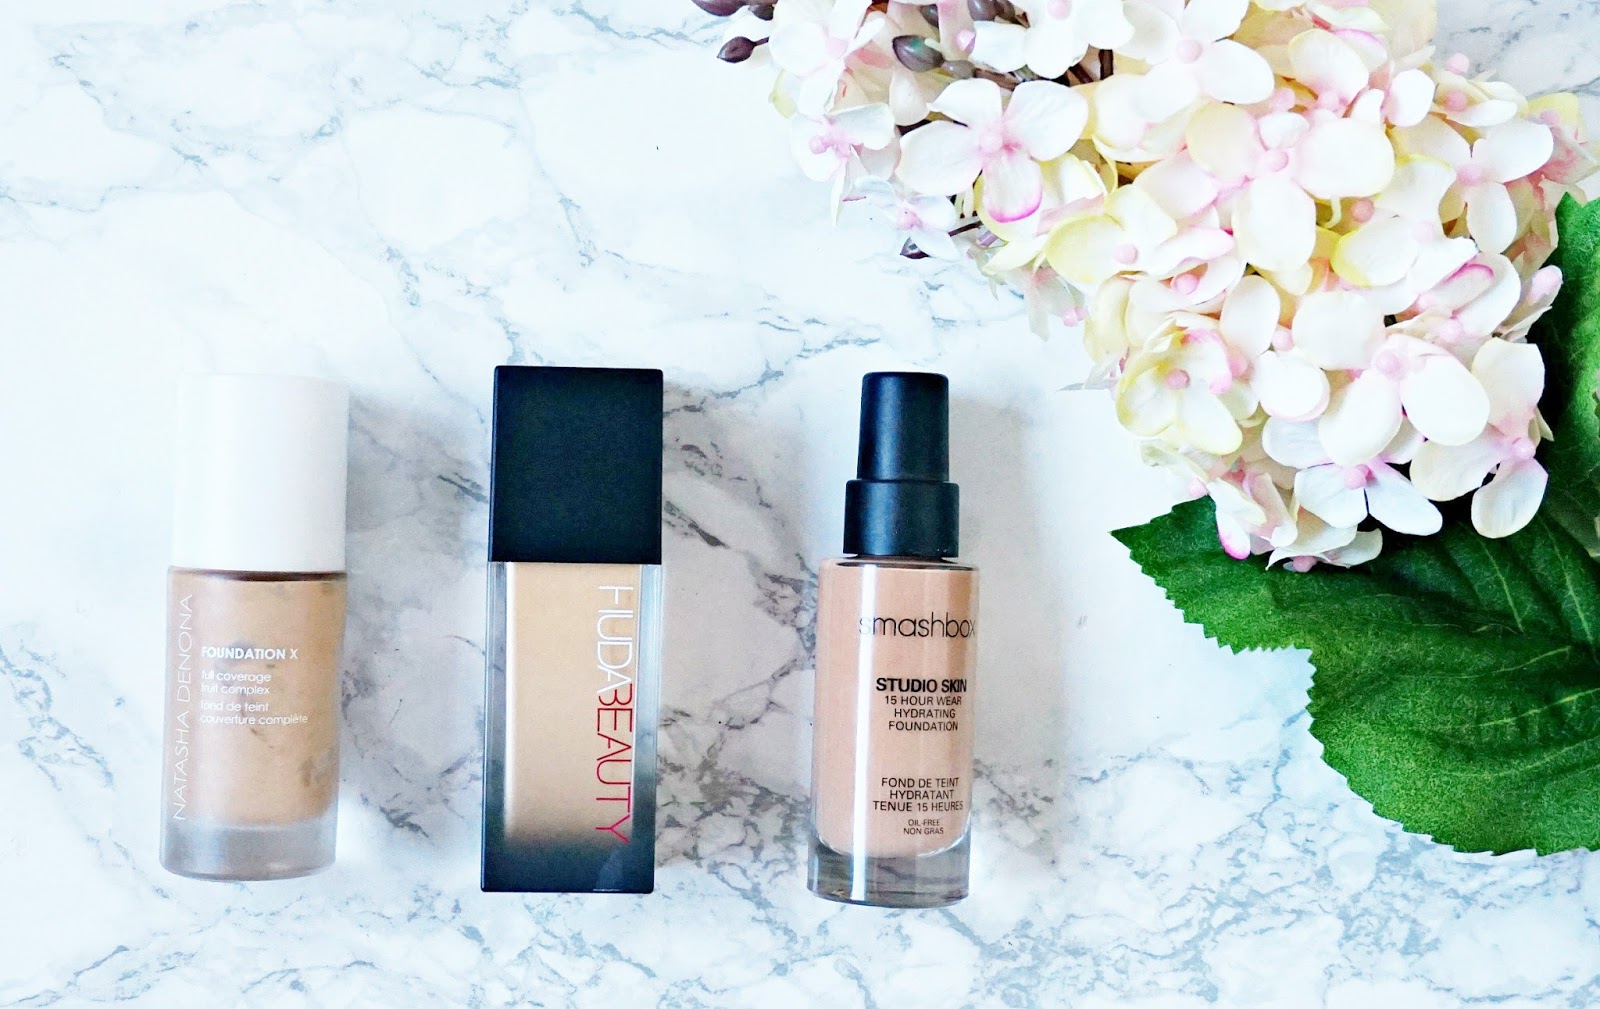 Full Coverage Foundations for dry skin